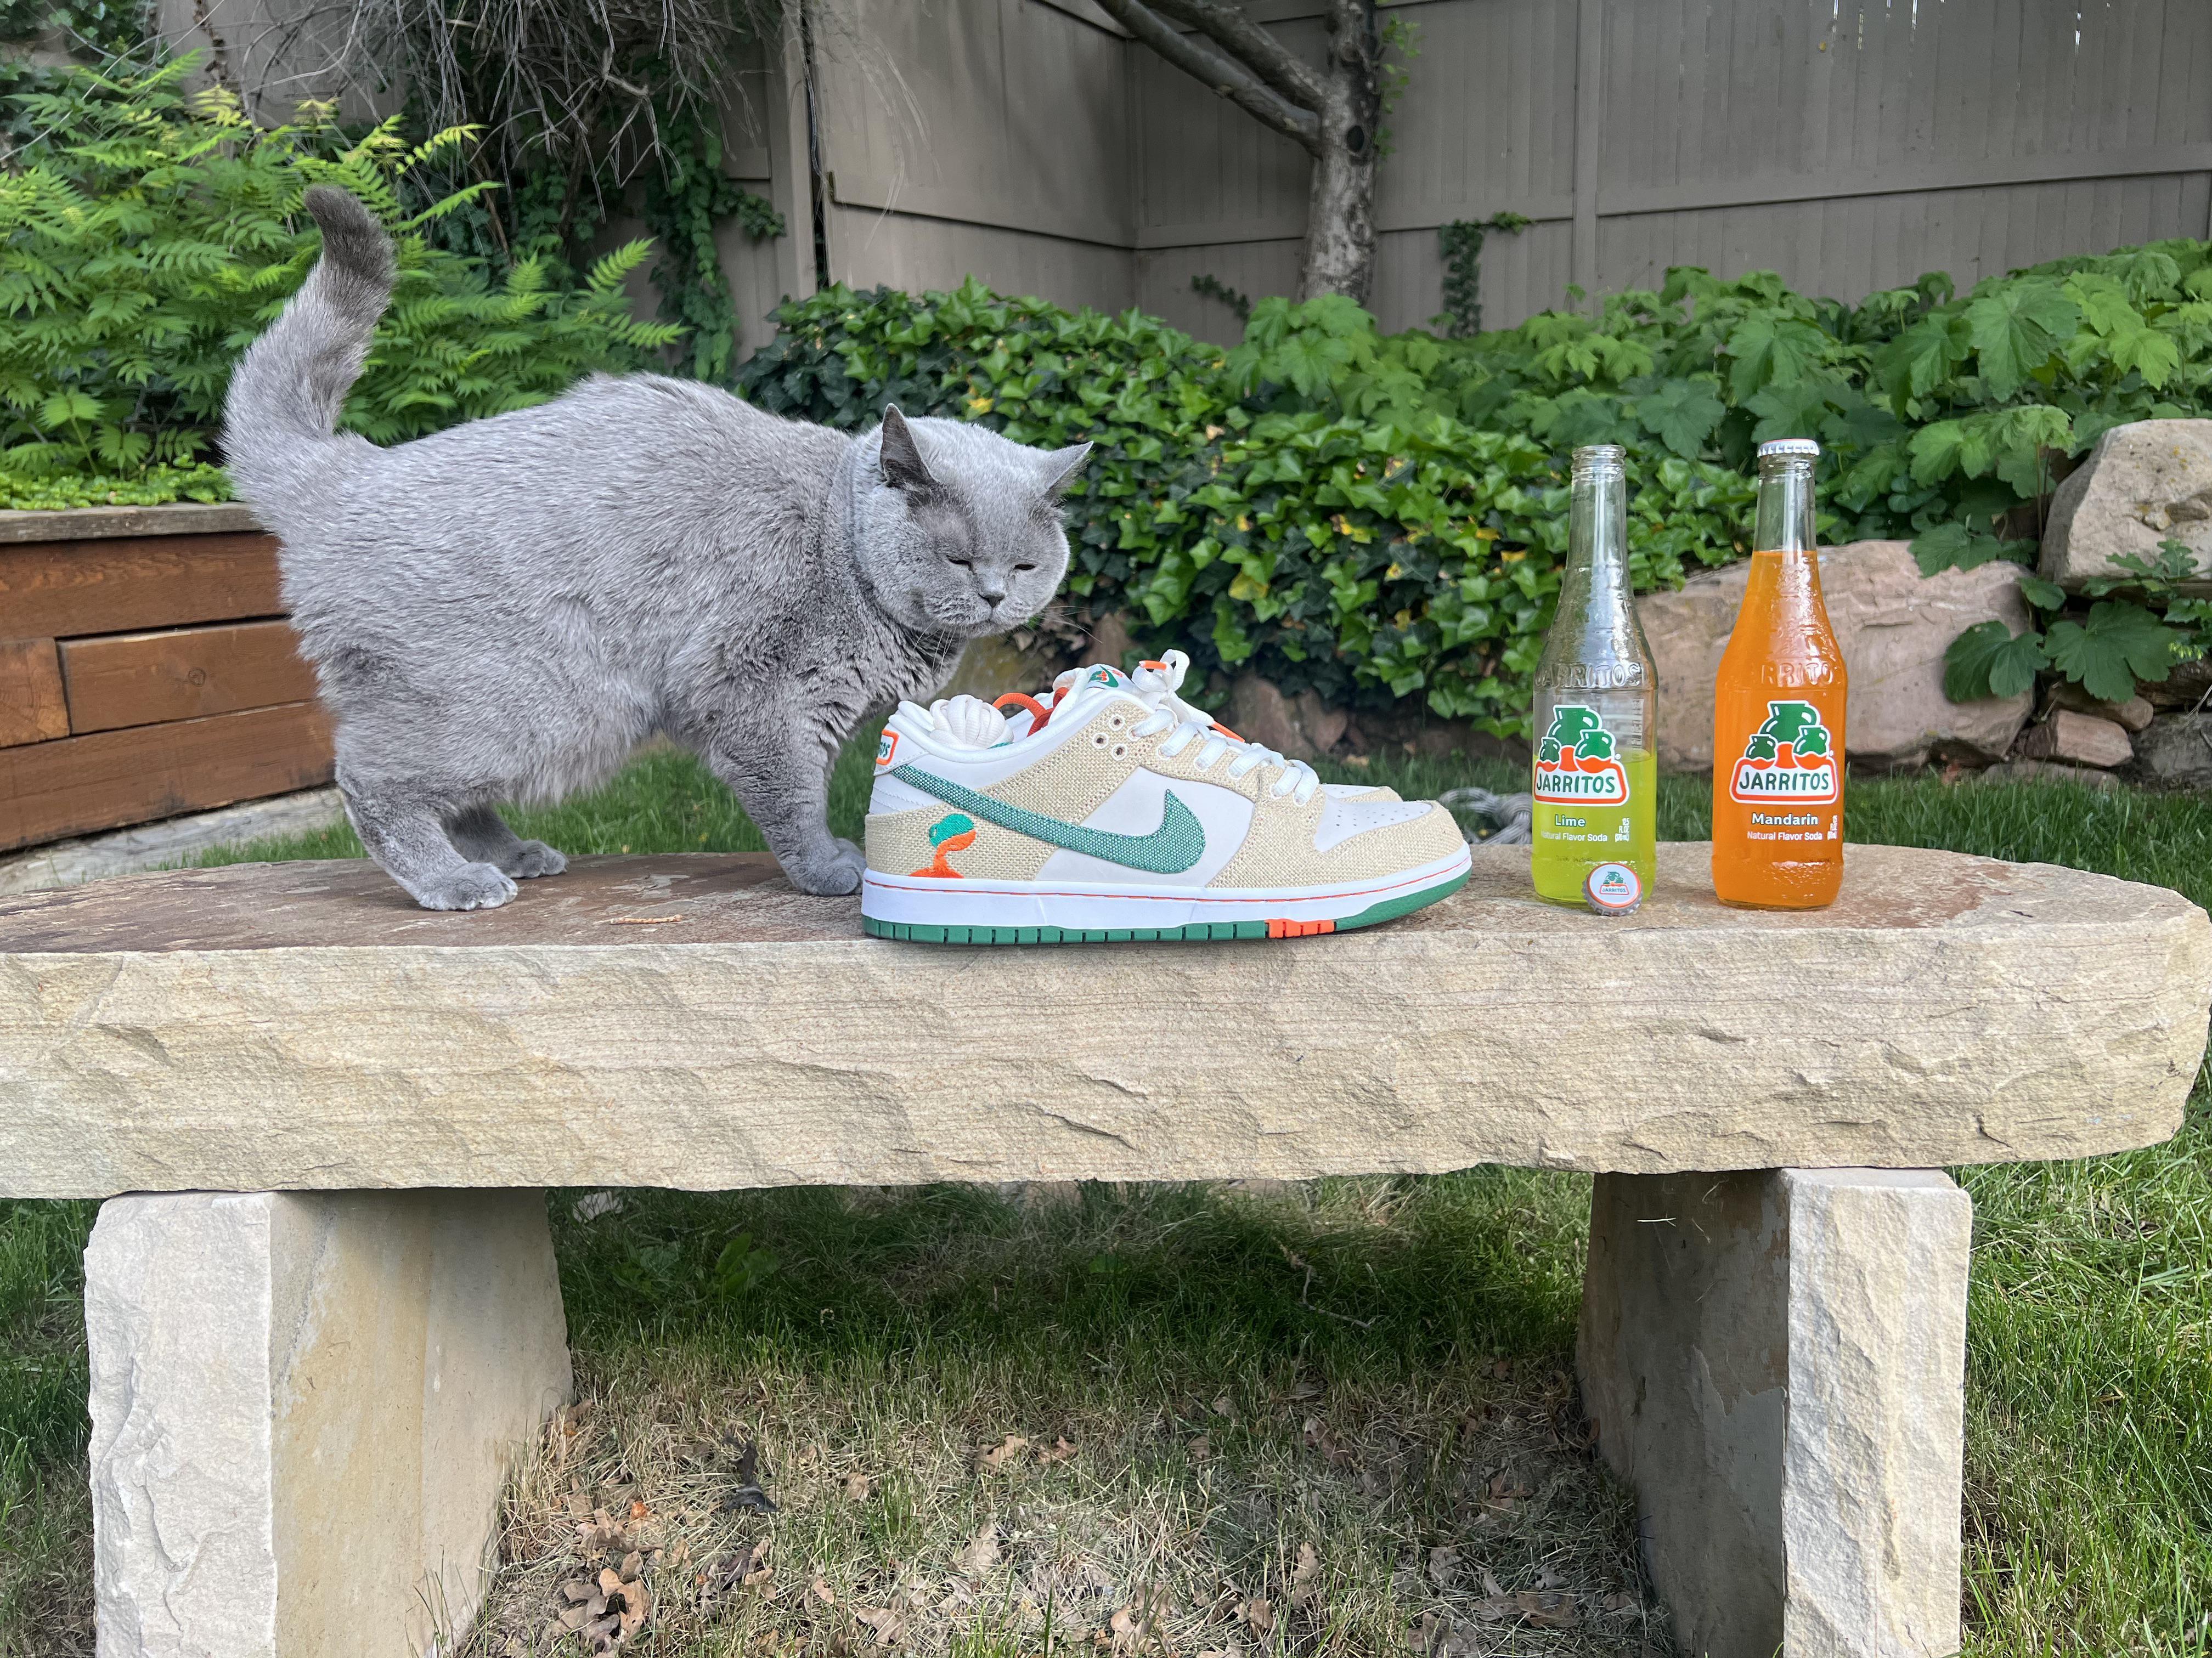 Jarritos Dunk Low Yc Batch In Hand Pics Lace Swaps And Re